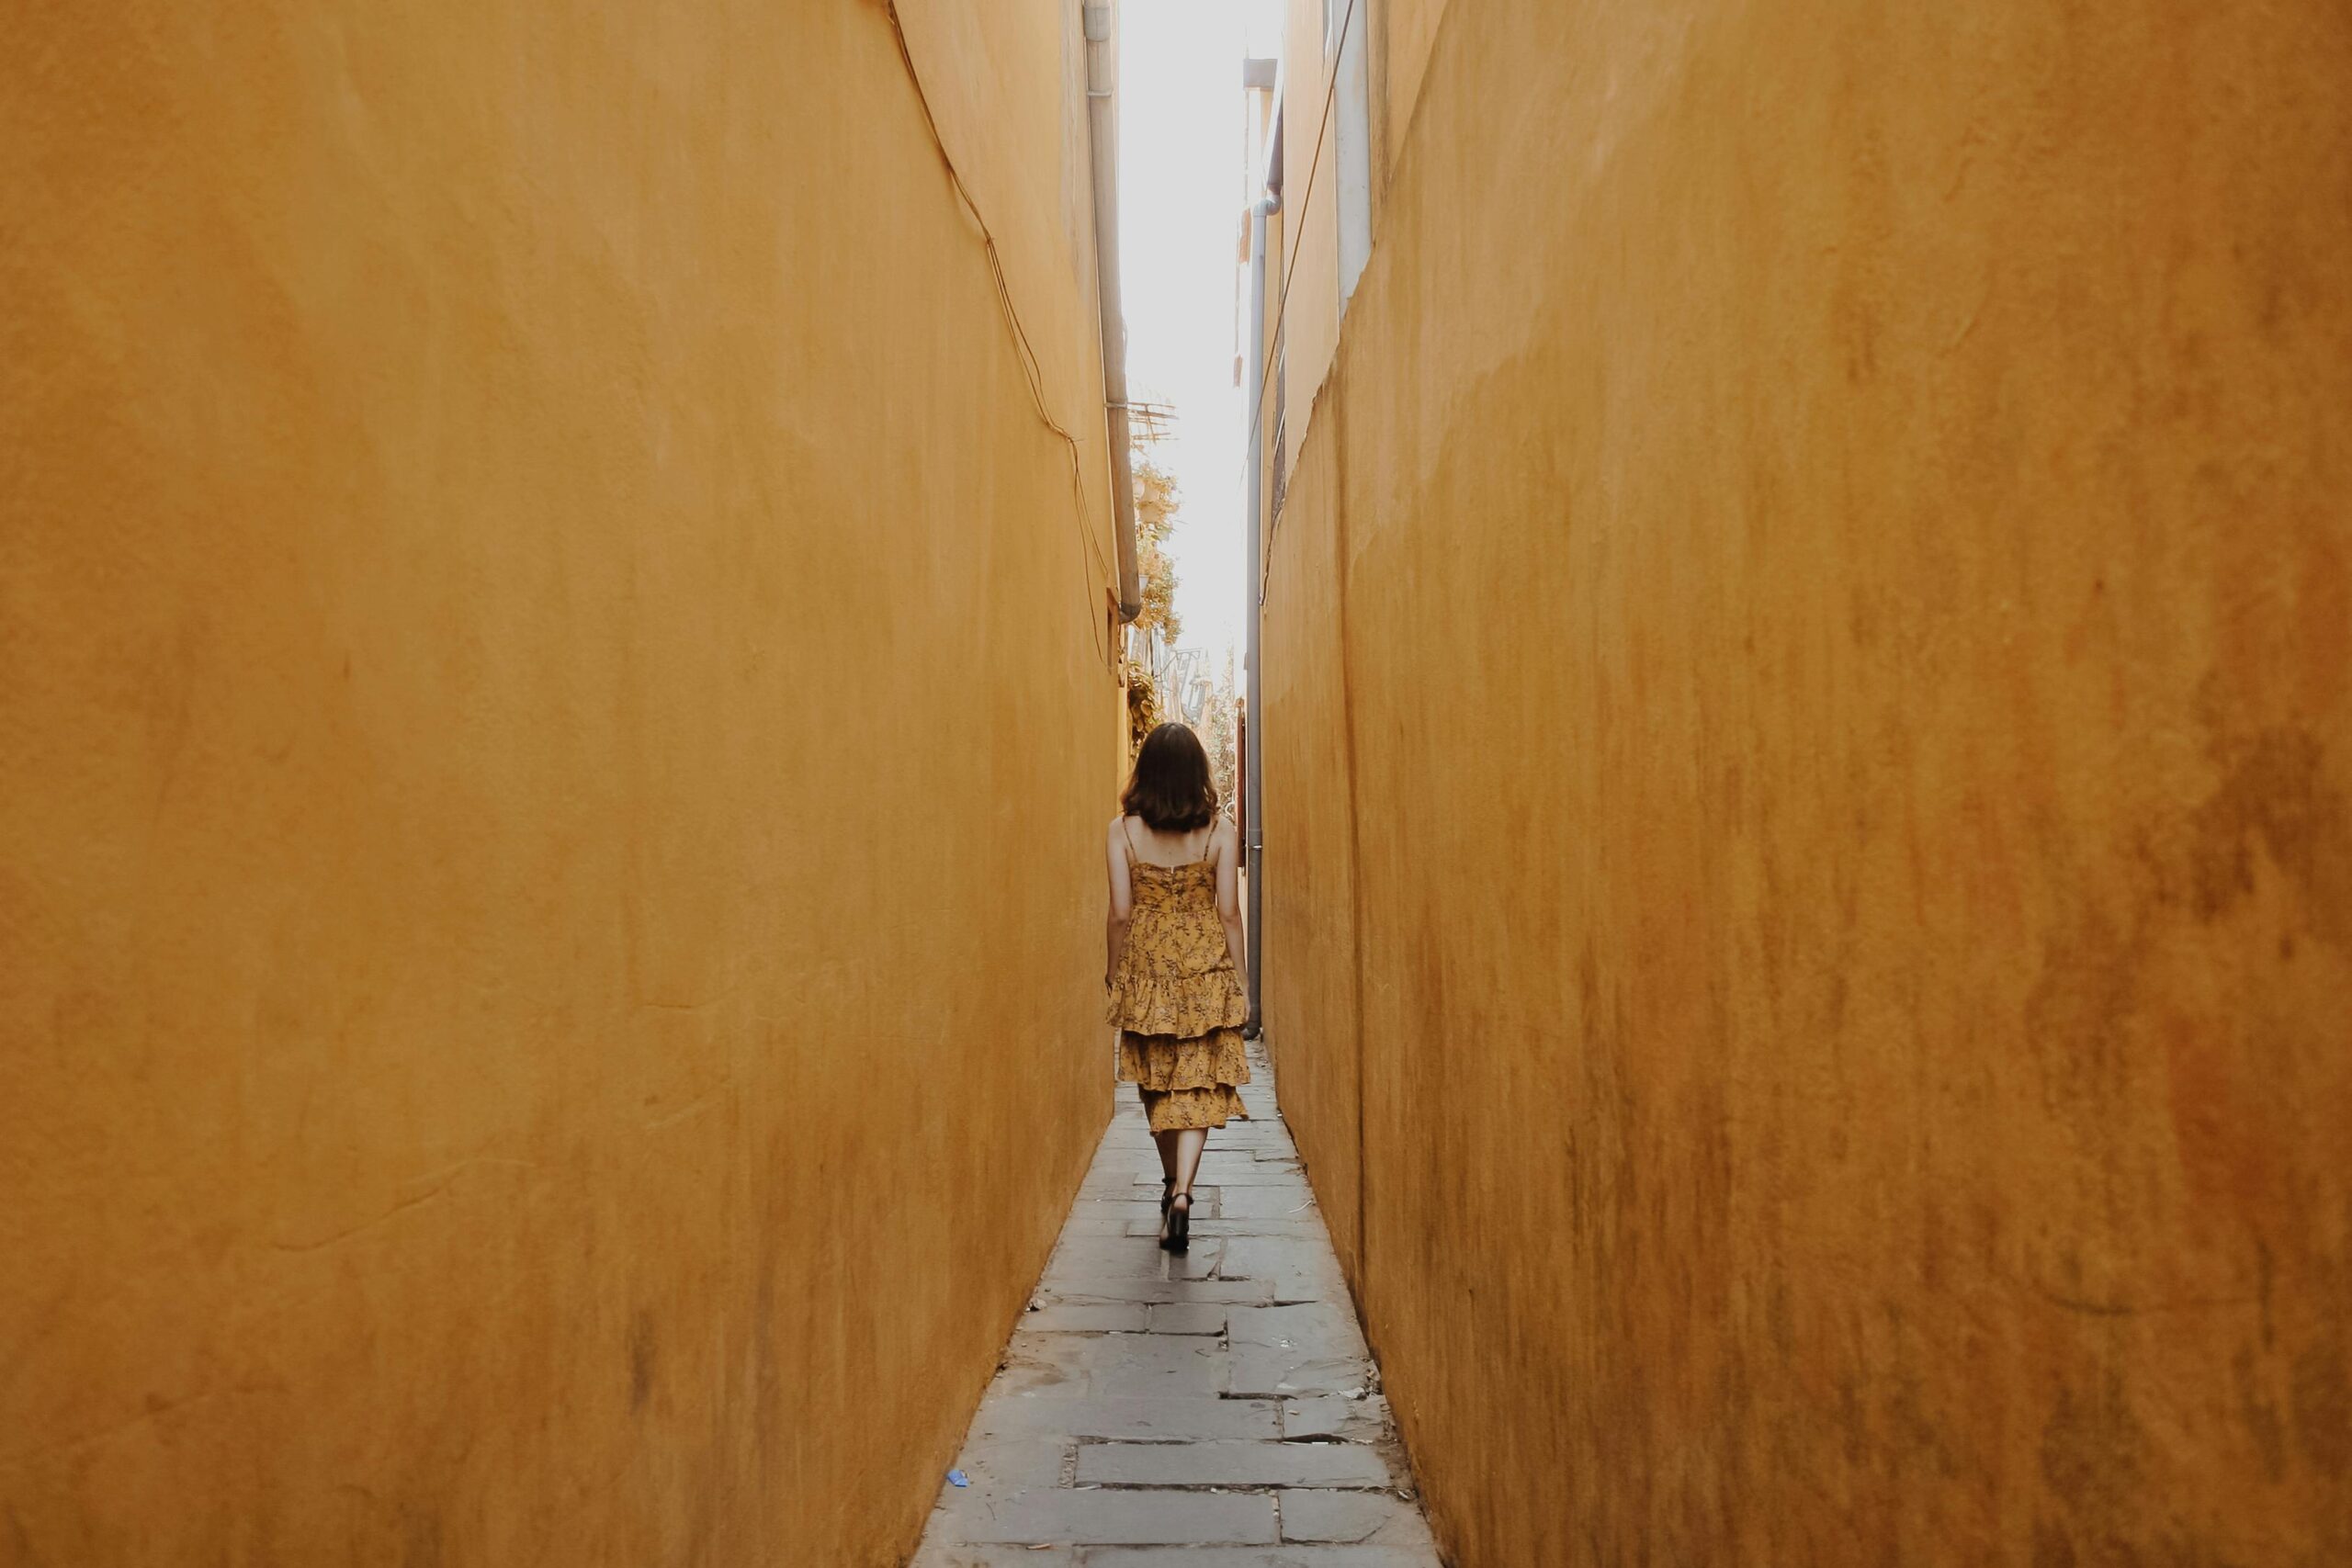 Woman walking down an alleyway with high yellow walls on either side, representing trauma keeping you stuck.